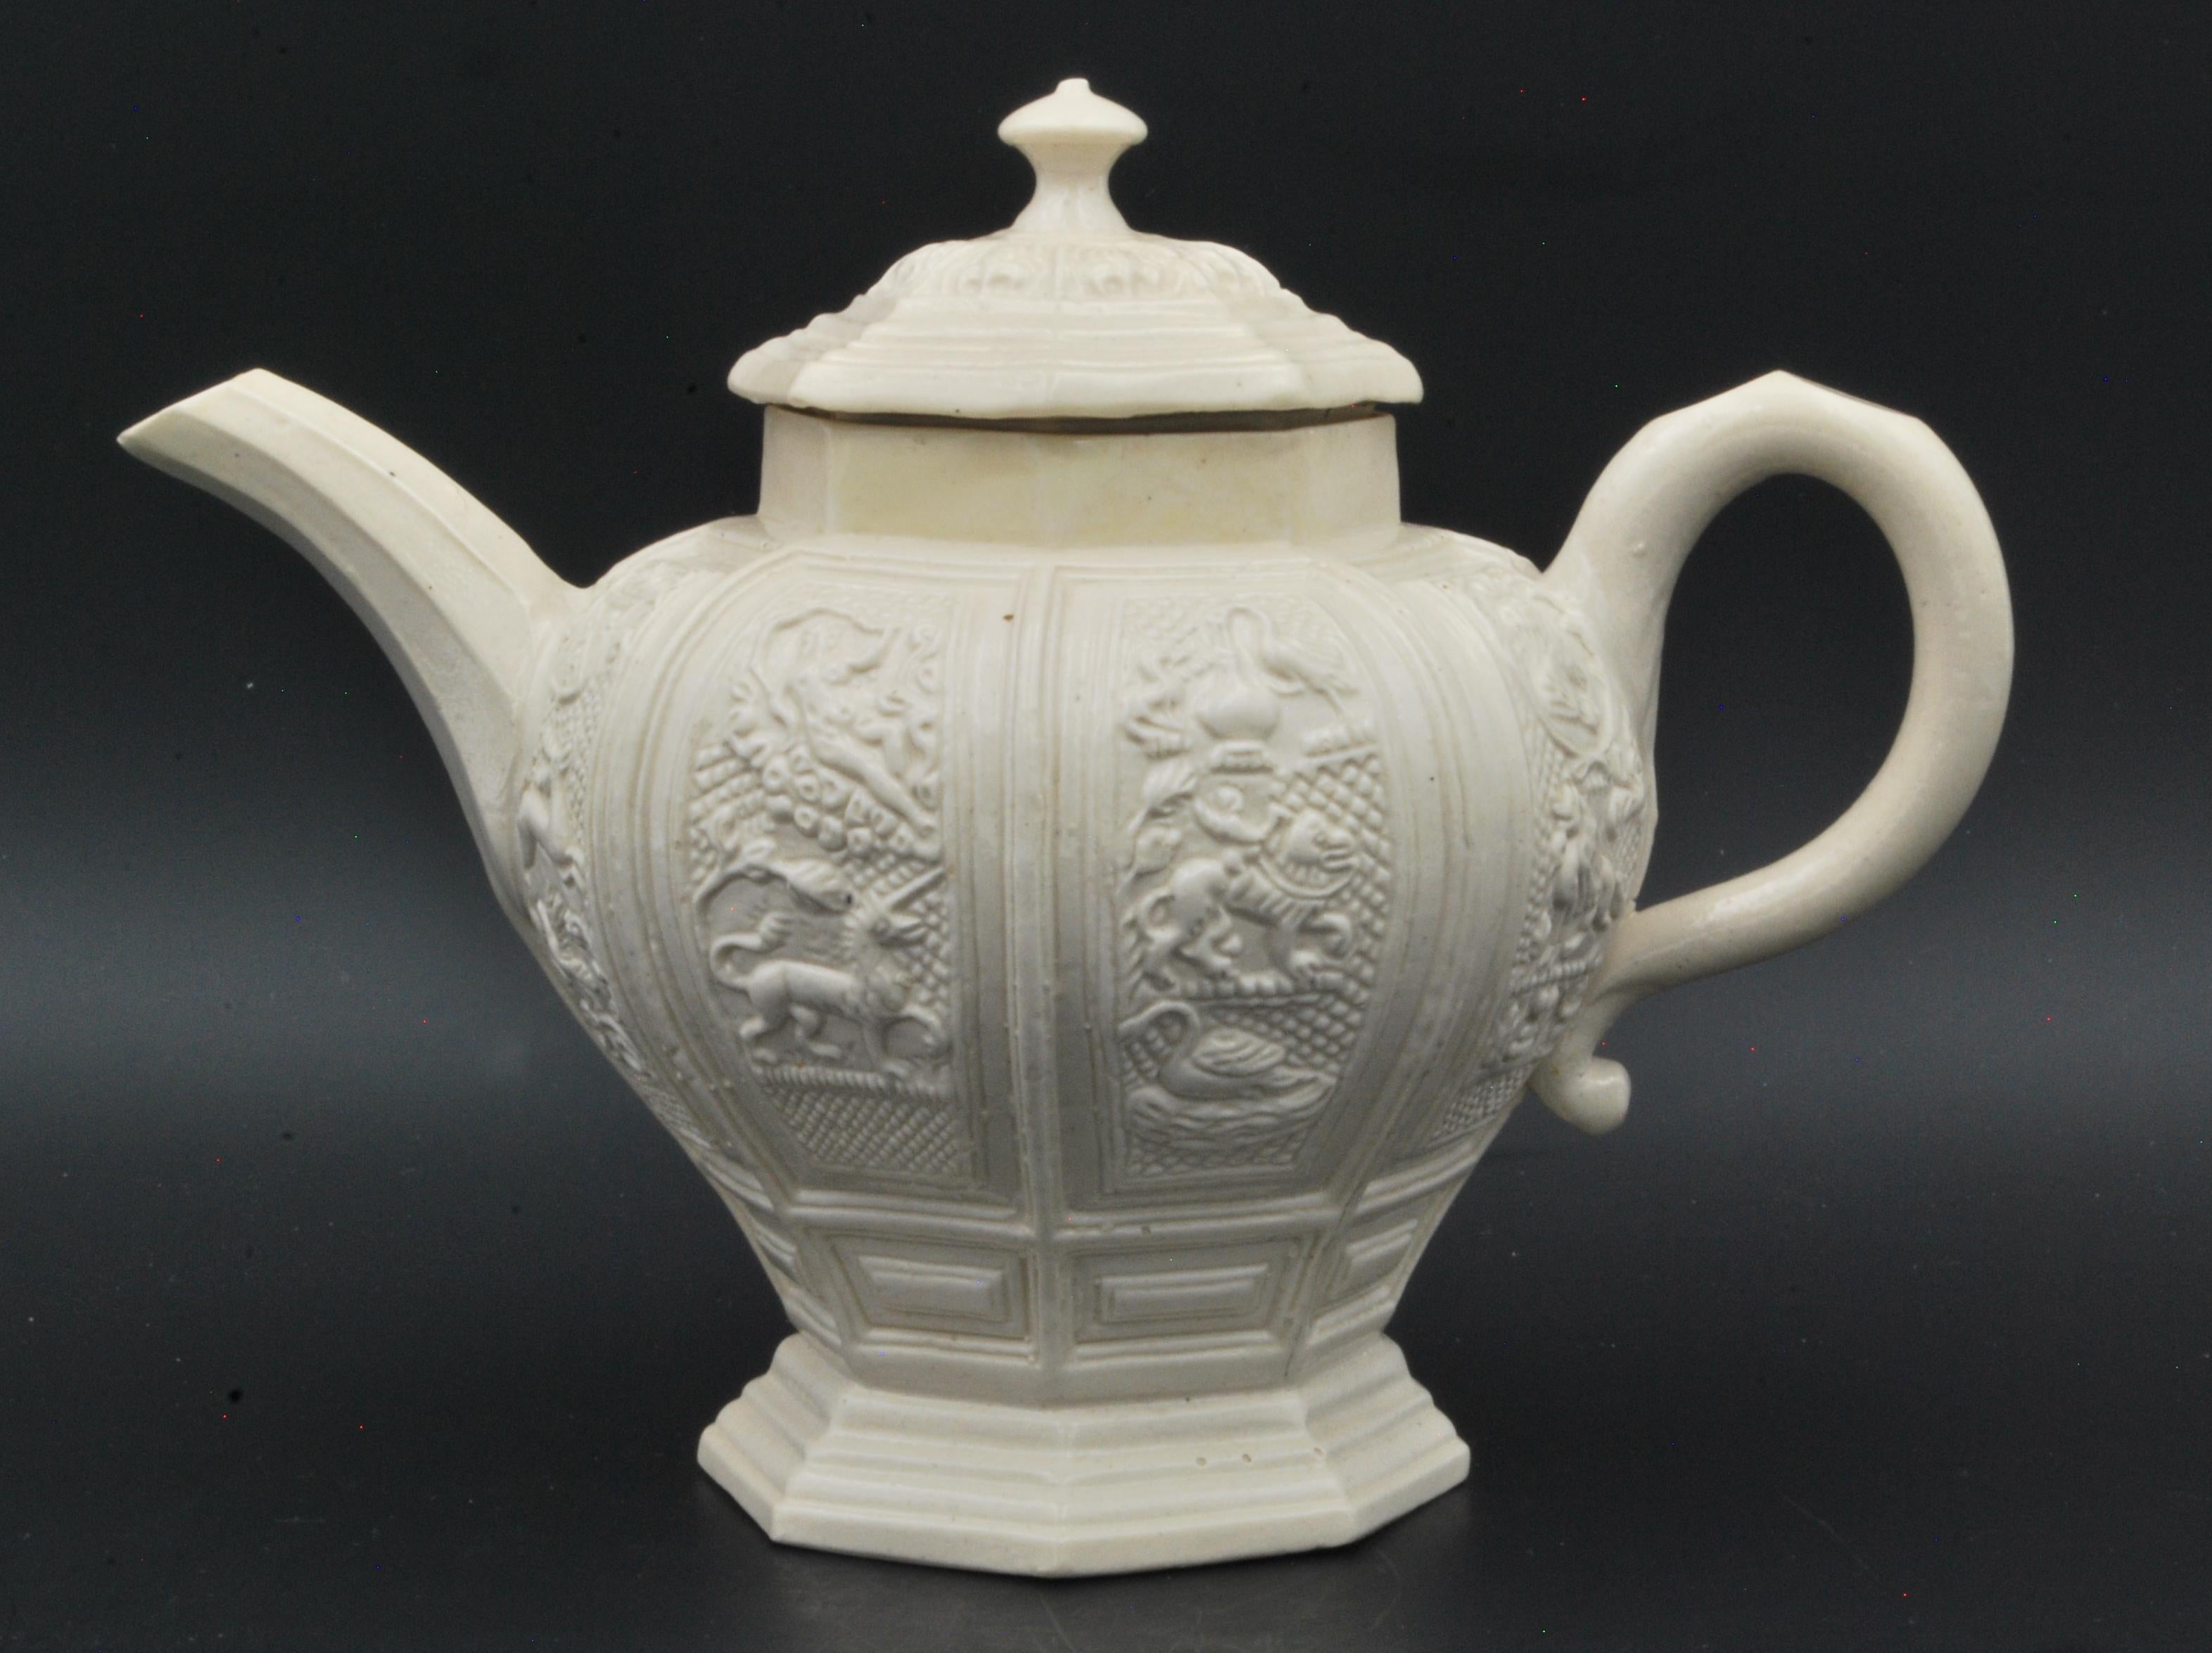 In salt-glazed stoneware, crisply moulded with fabulous beasts and birds.